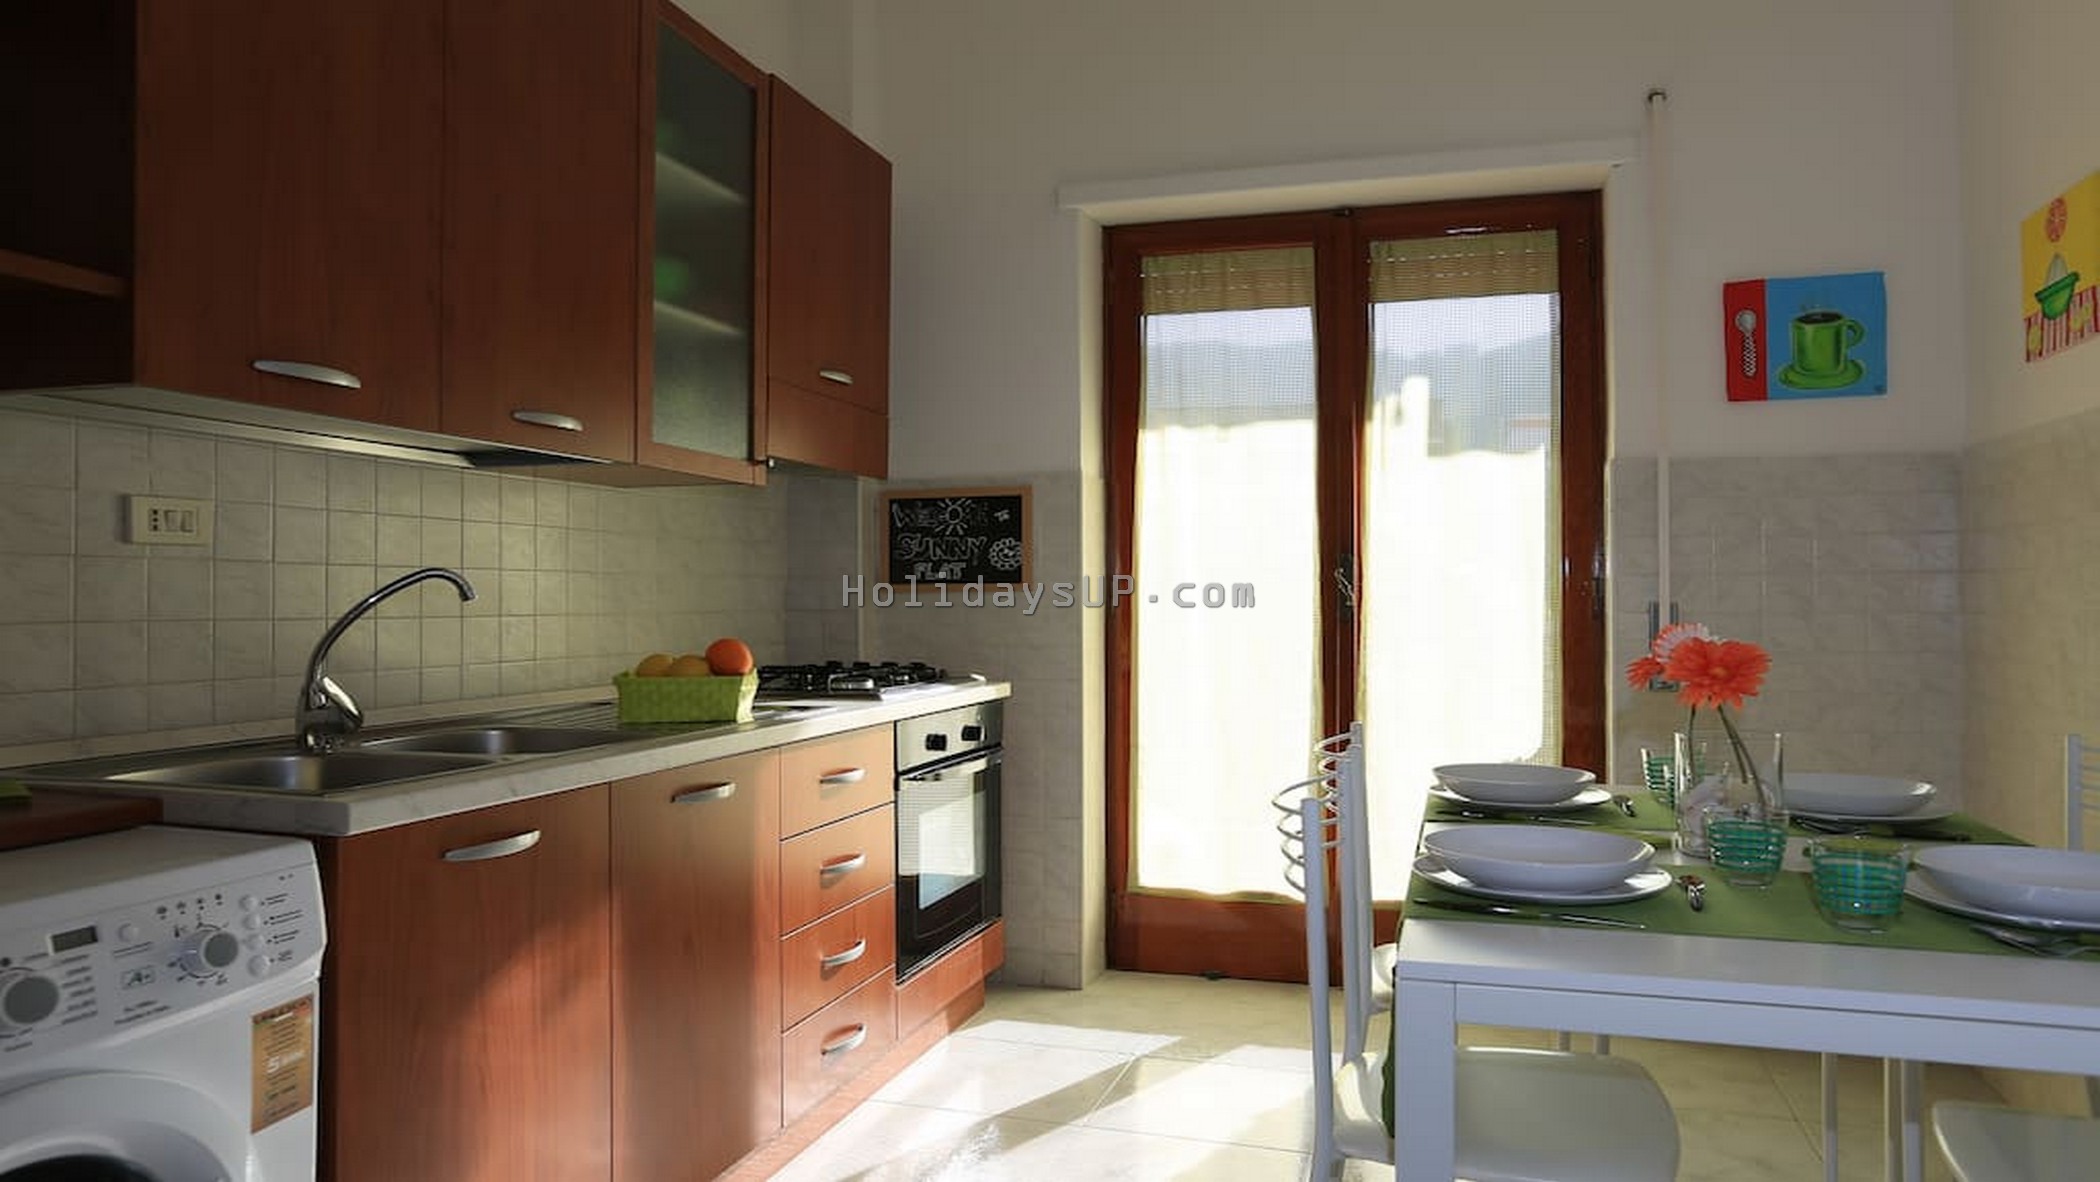 Casa Mariandre C kitchen room well equipped Sorrento apartment enjoy